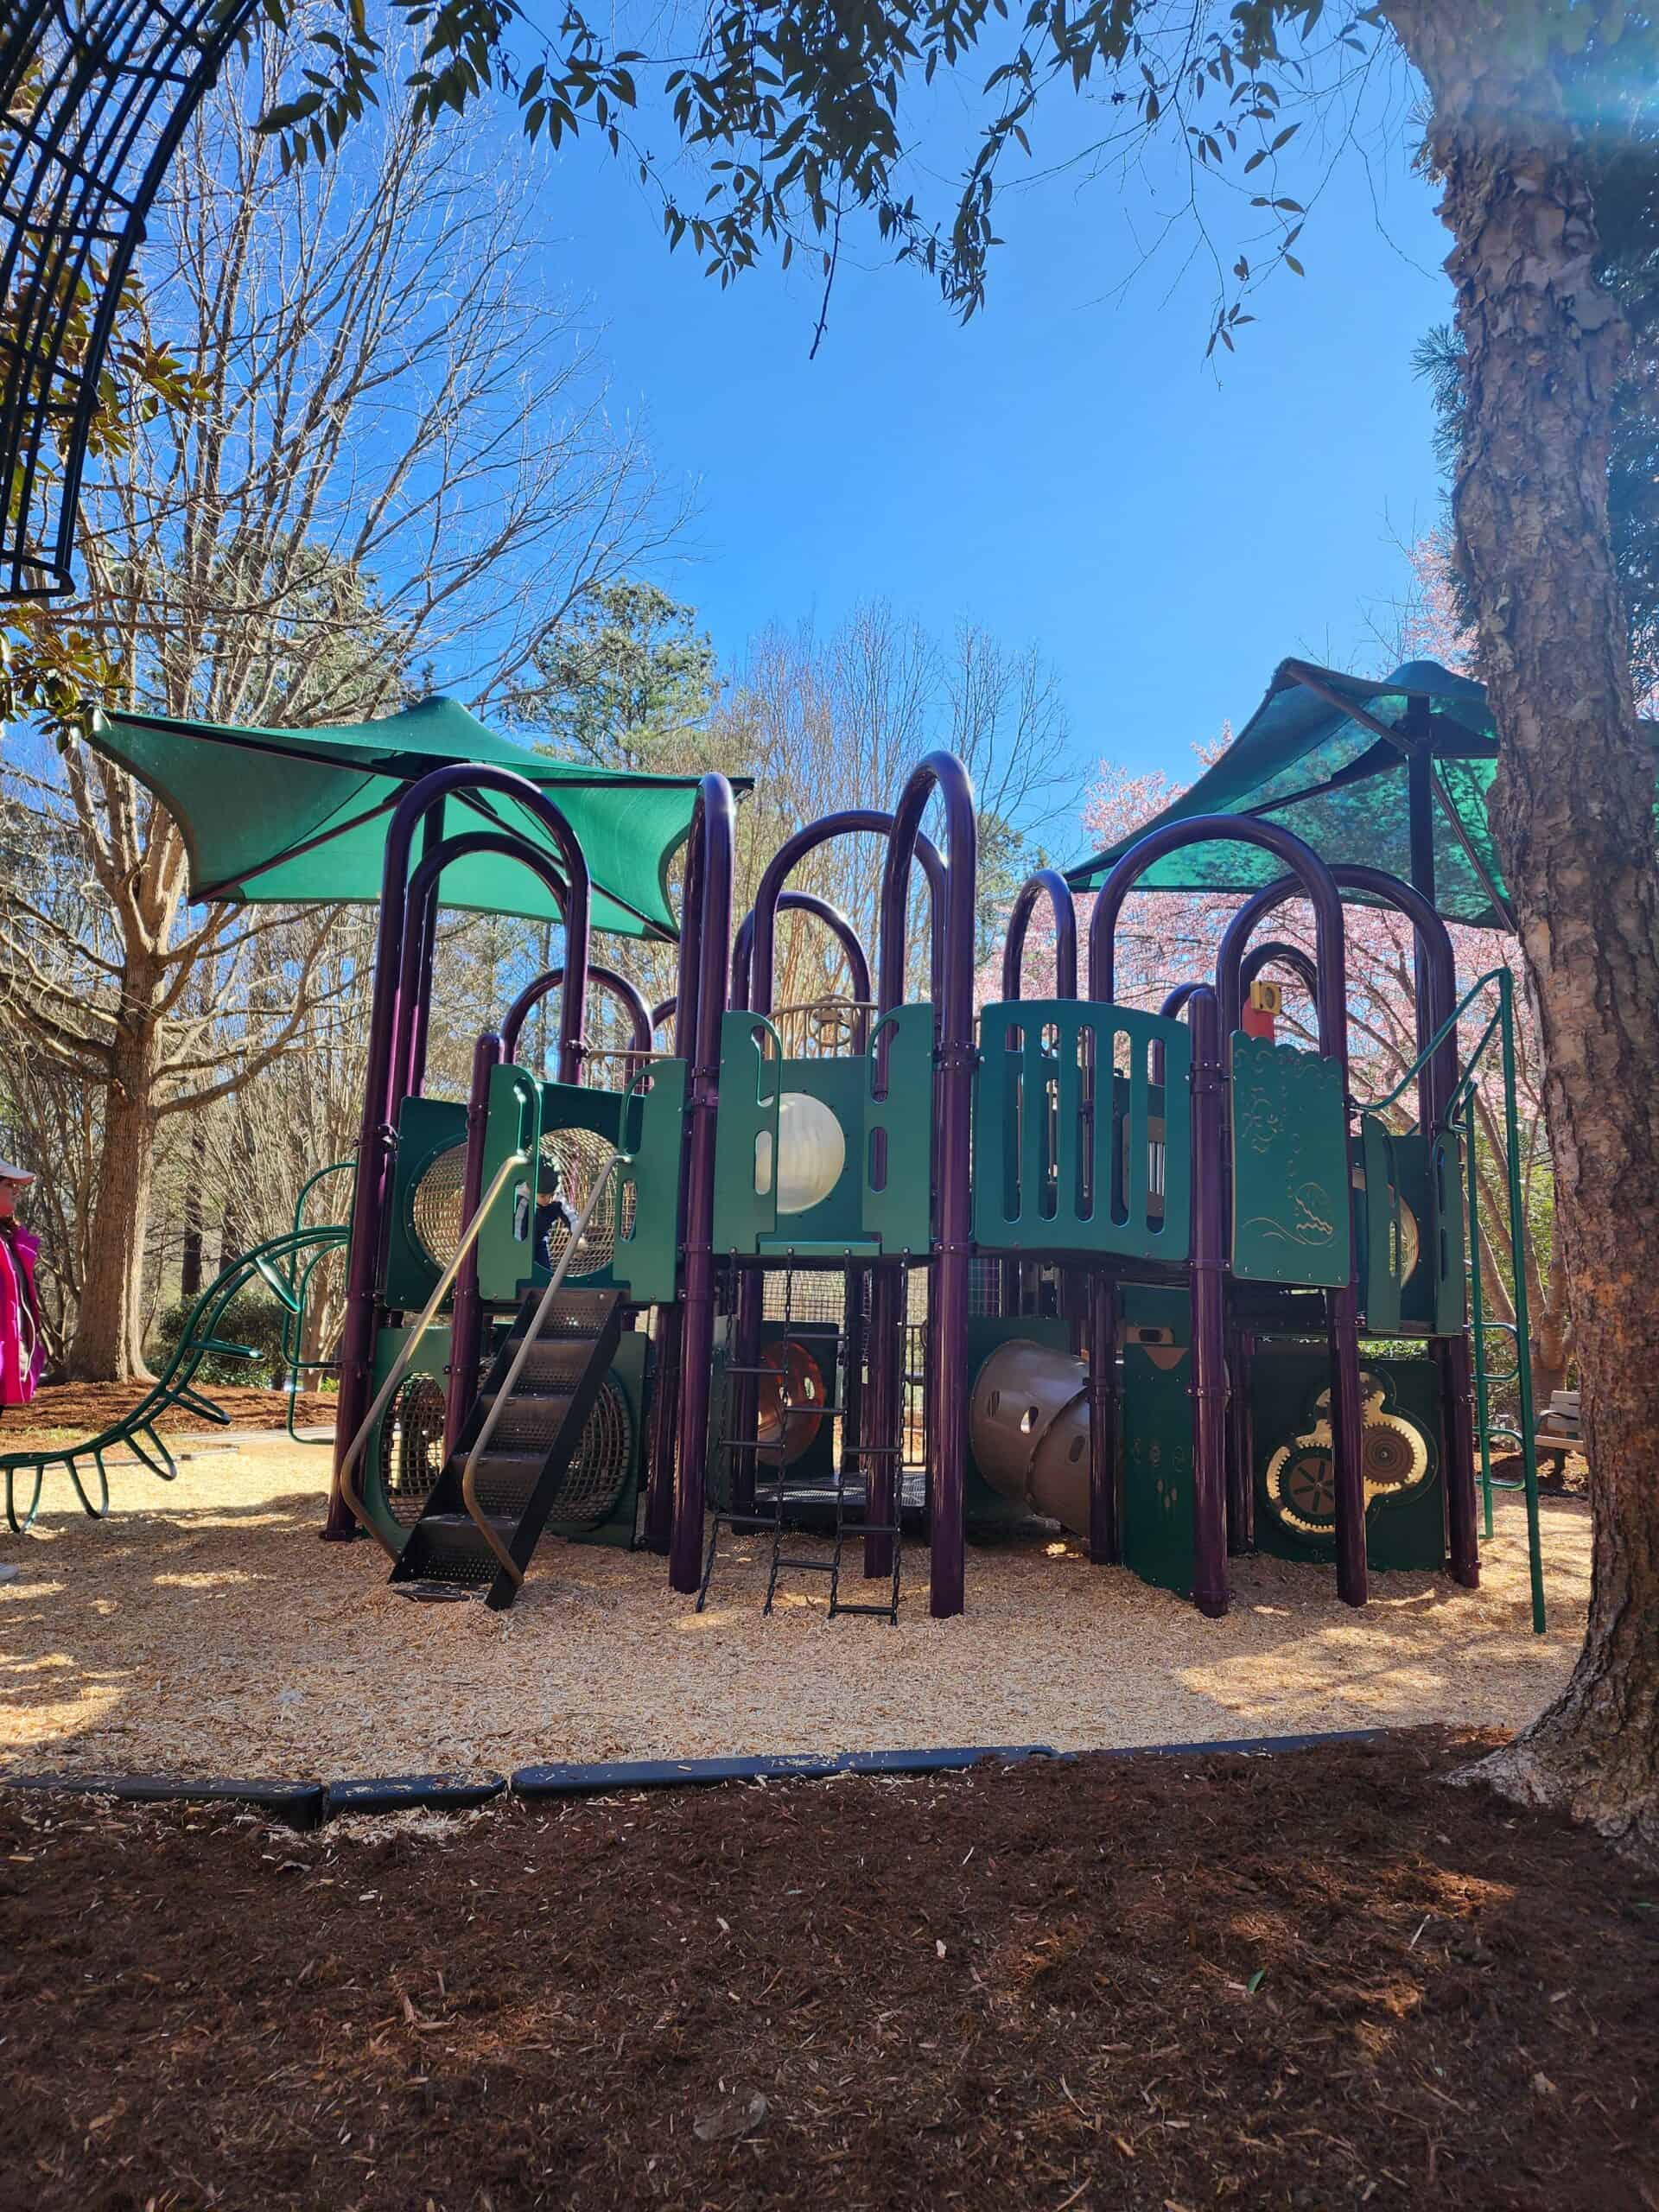 a multi-level playground structure with green shades and purple railings stands amidst a natural setting with mature trees and a mulch-covered ground. The playground invites children to climb, slide, and explore in the heart of Cary, North Carolina